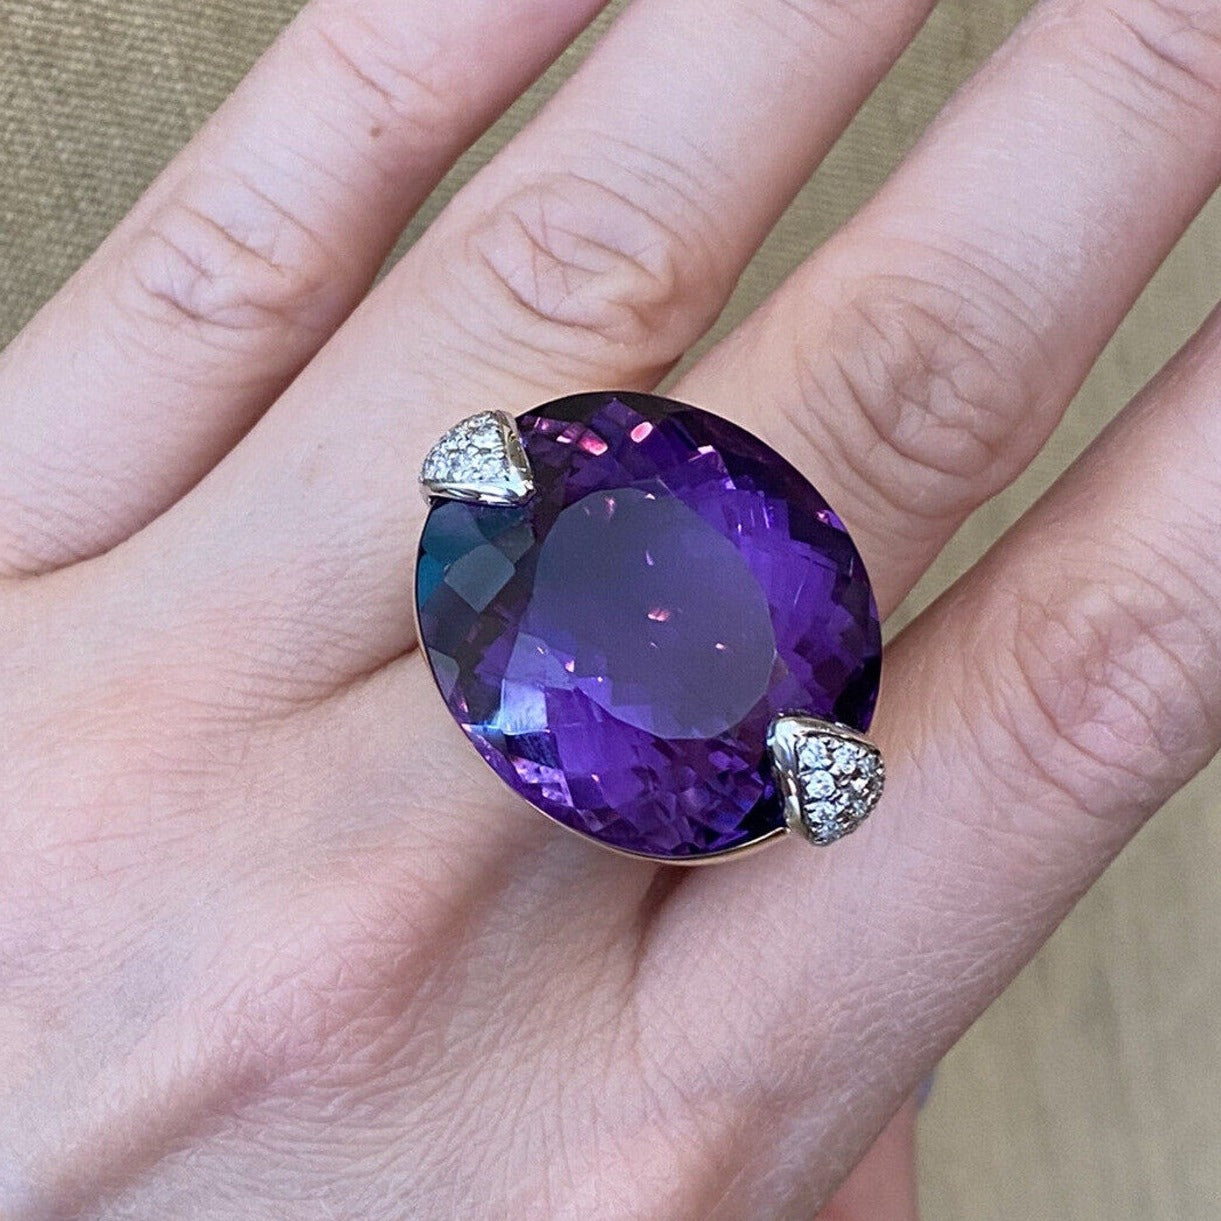 Large 54.03 cts Amethyst & Diamond Cocktail Ring in Plat & 18k Gold